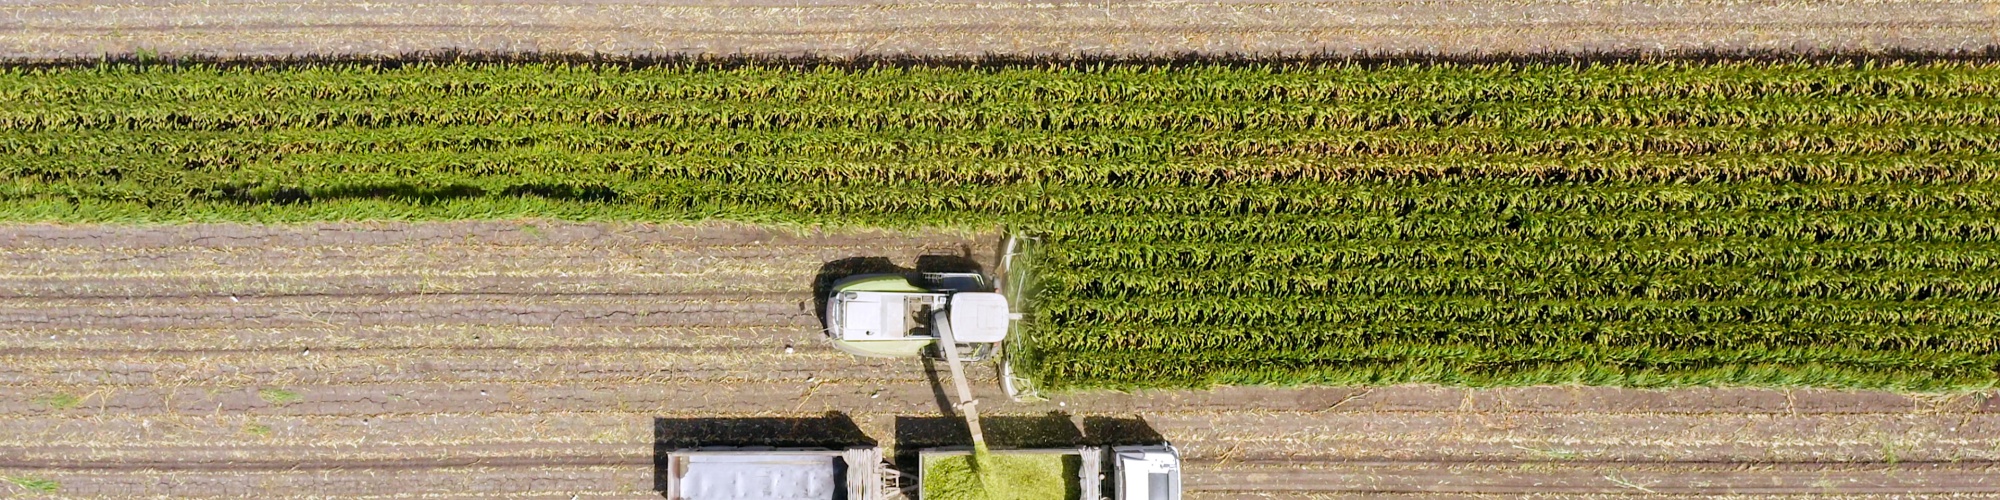 Birds eye view photo of a combine harvester harvesting corn for silage.